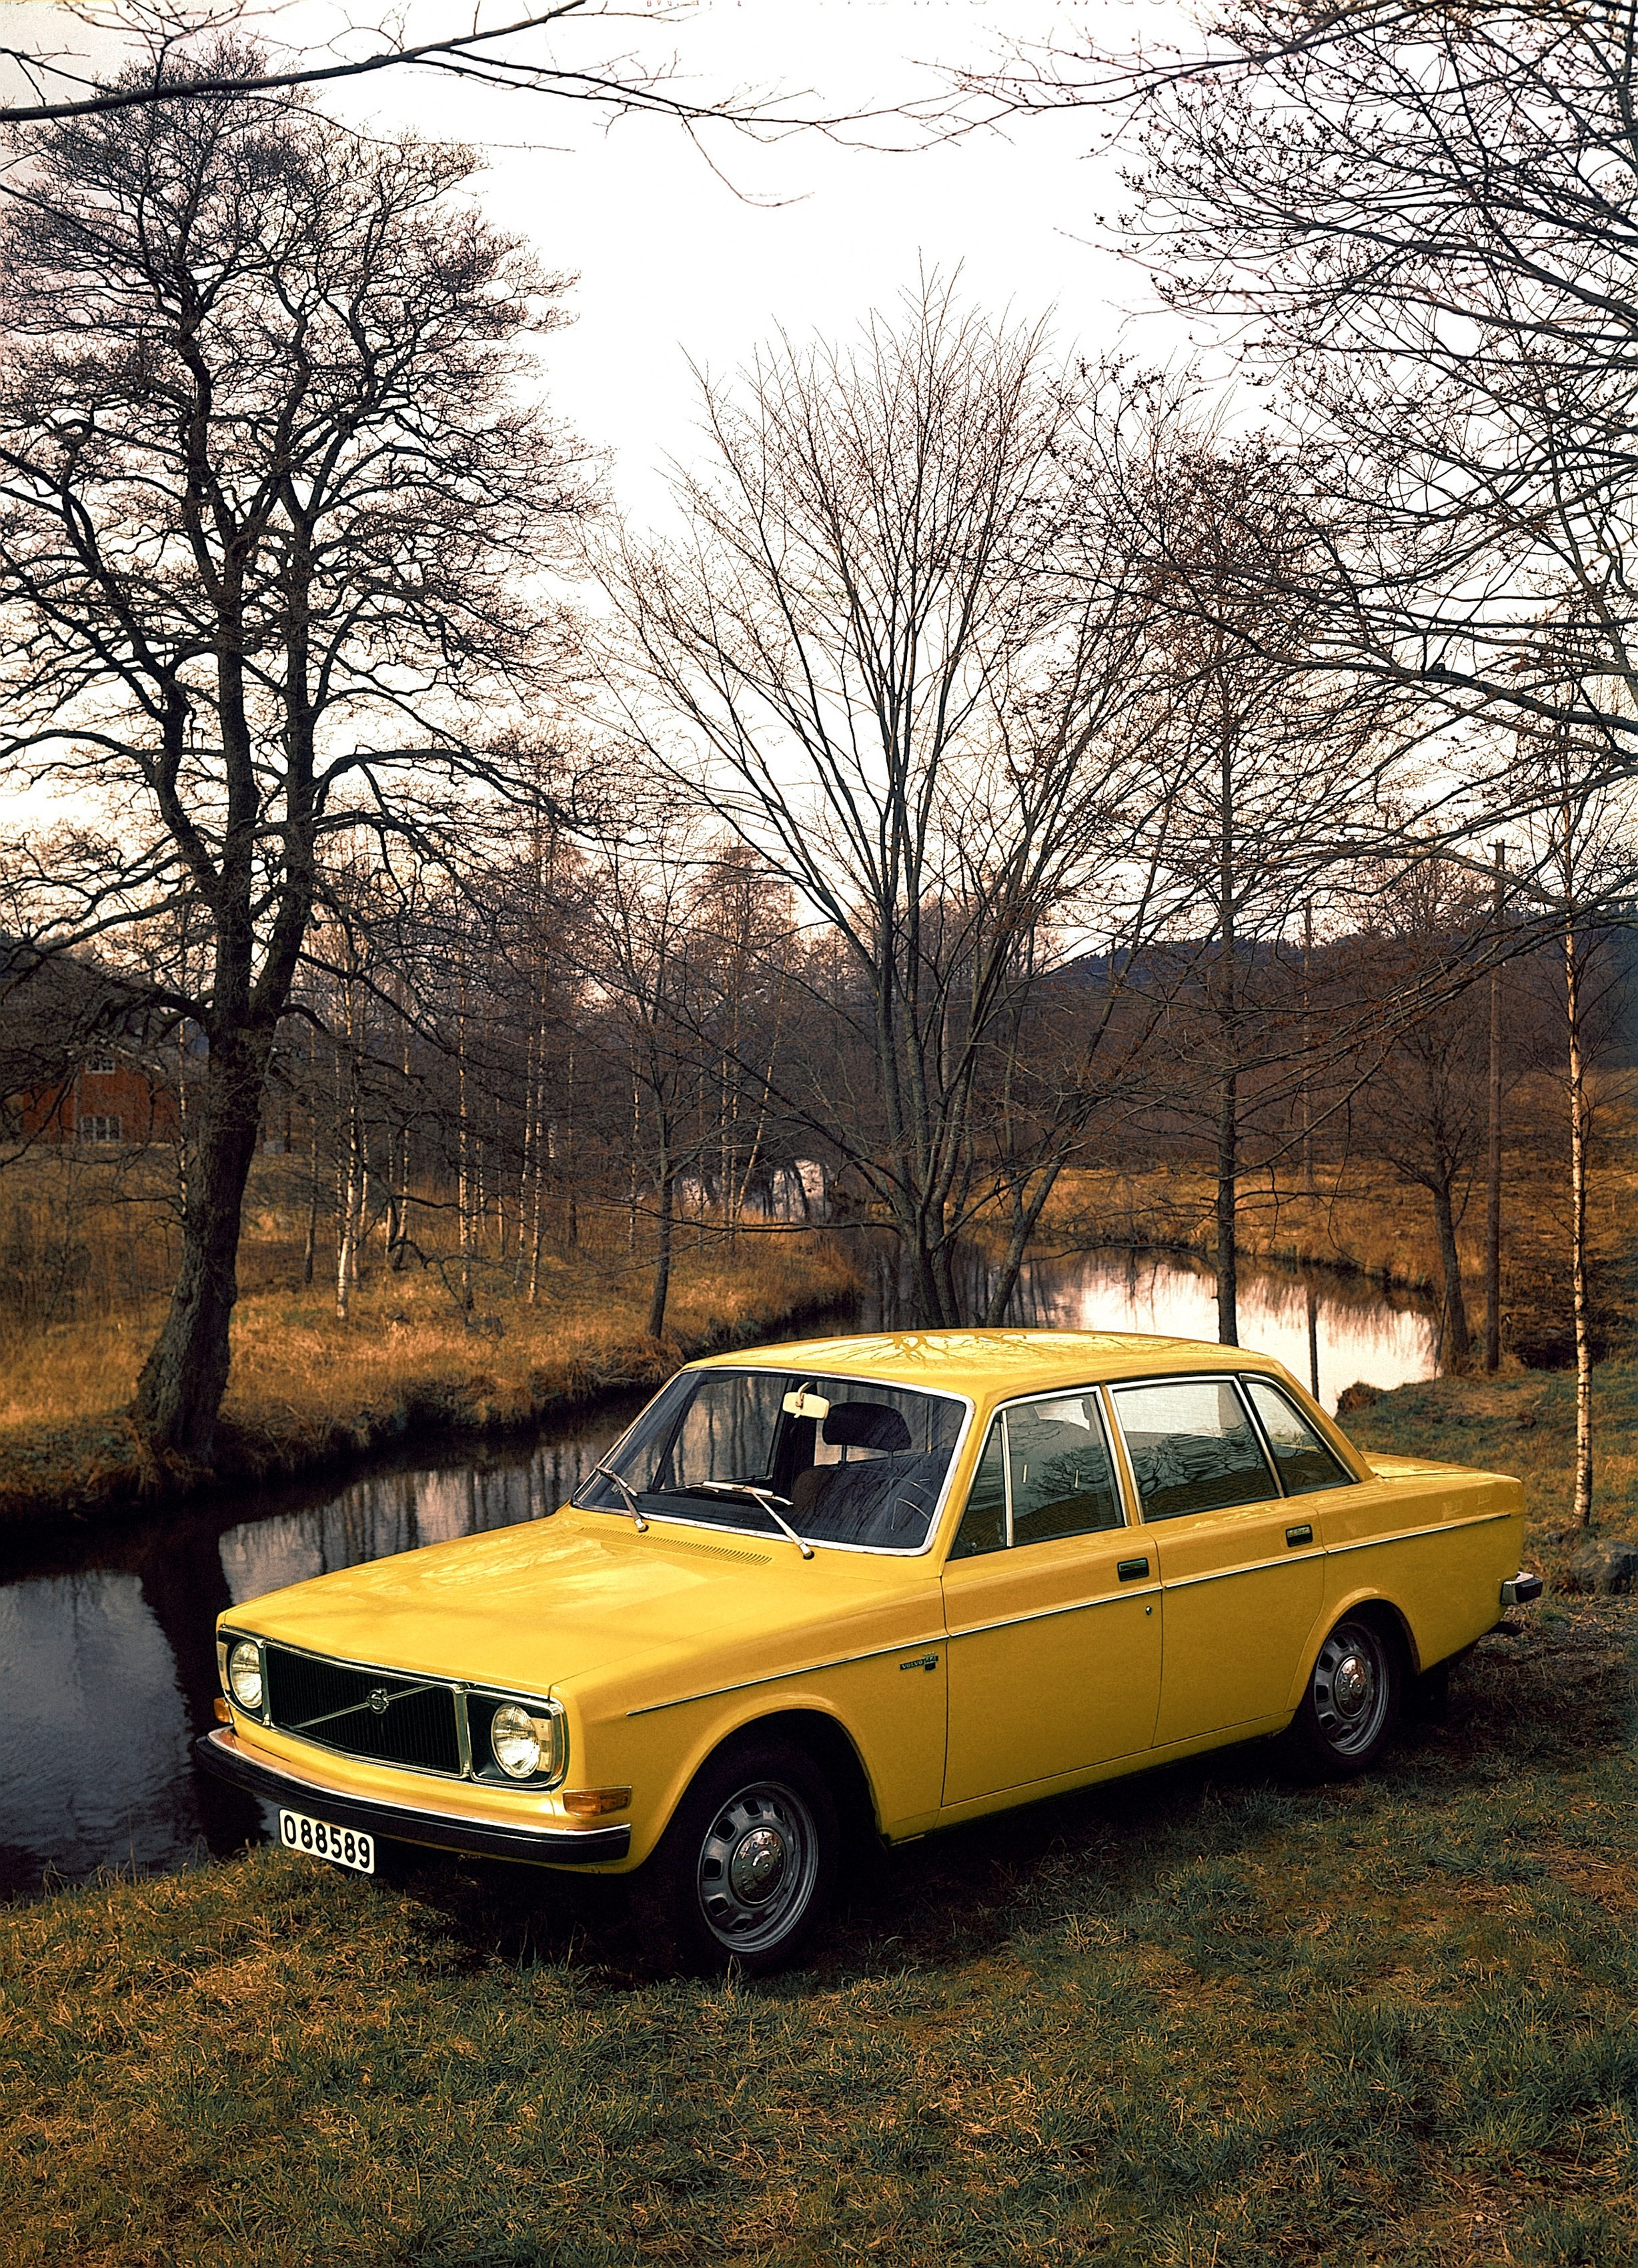 volvo-celebrates-50-years-of-its-first-smash-hit-the-140-series